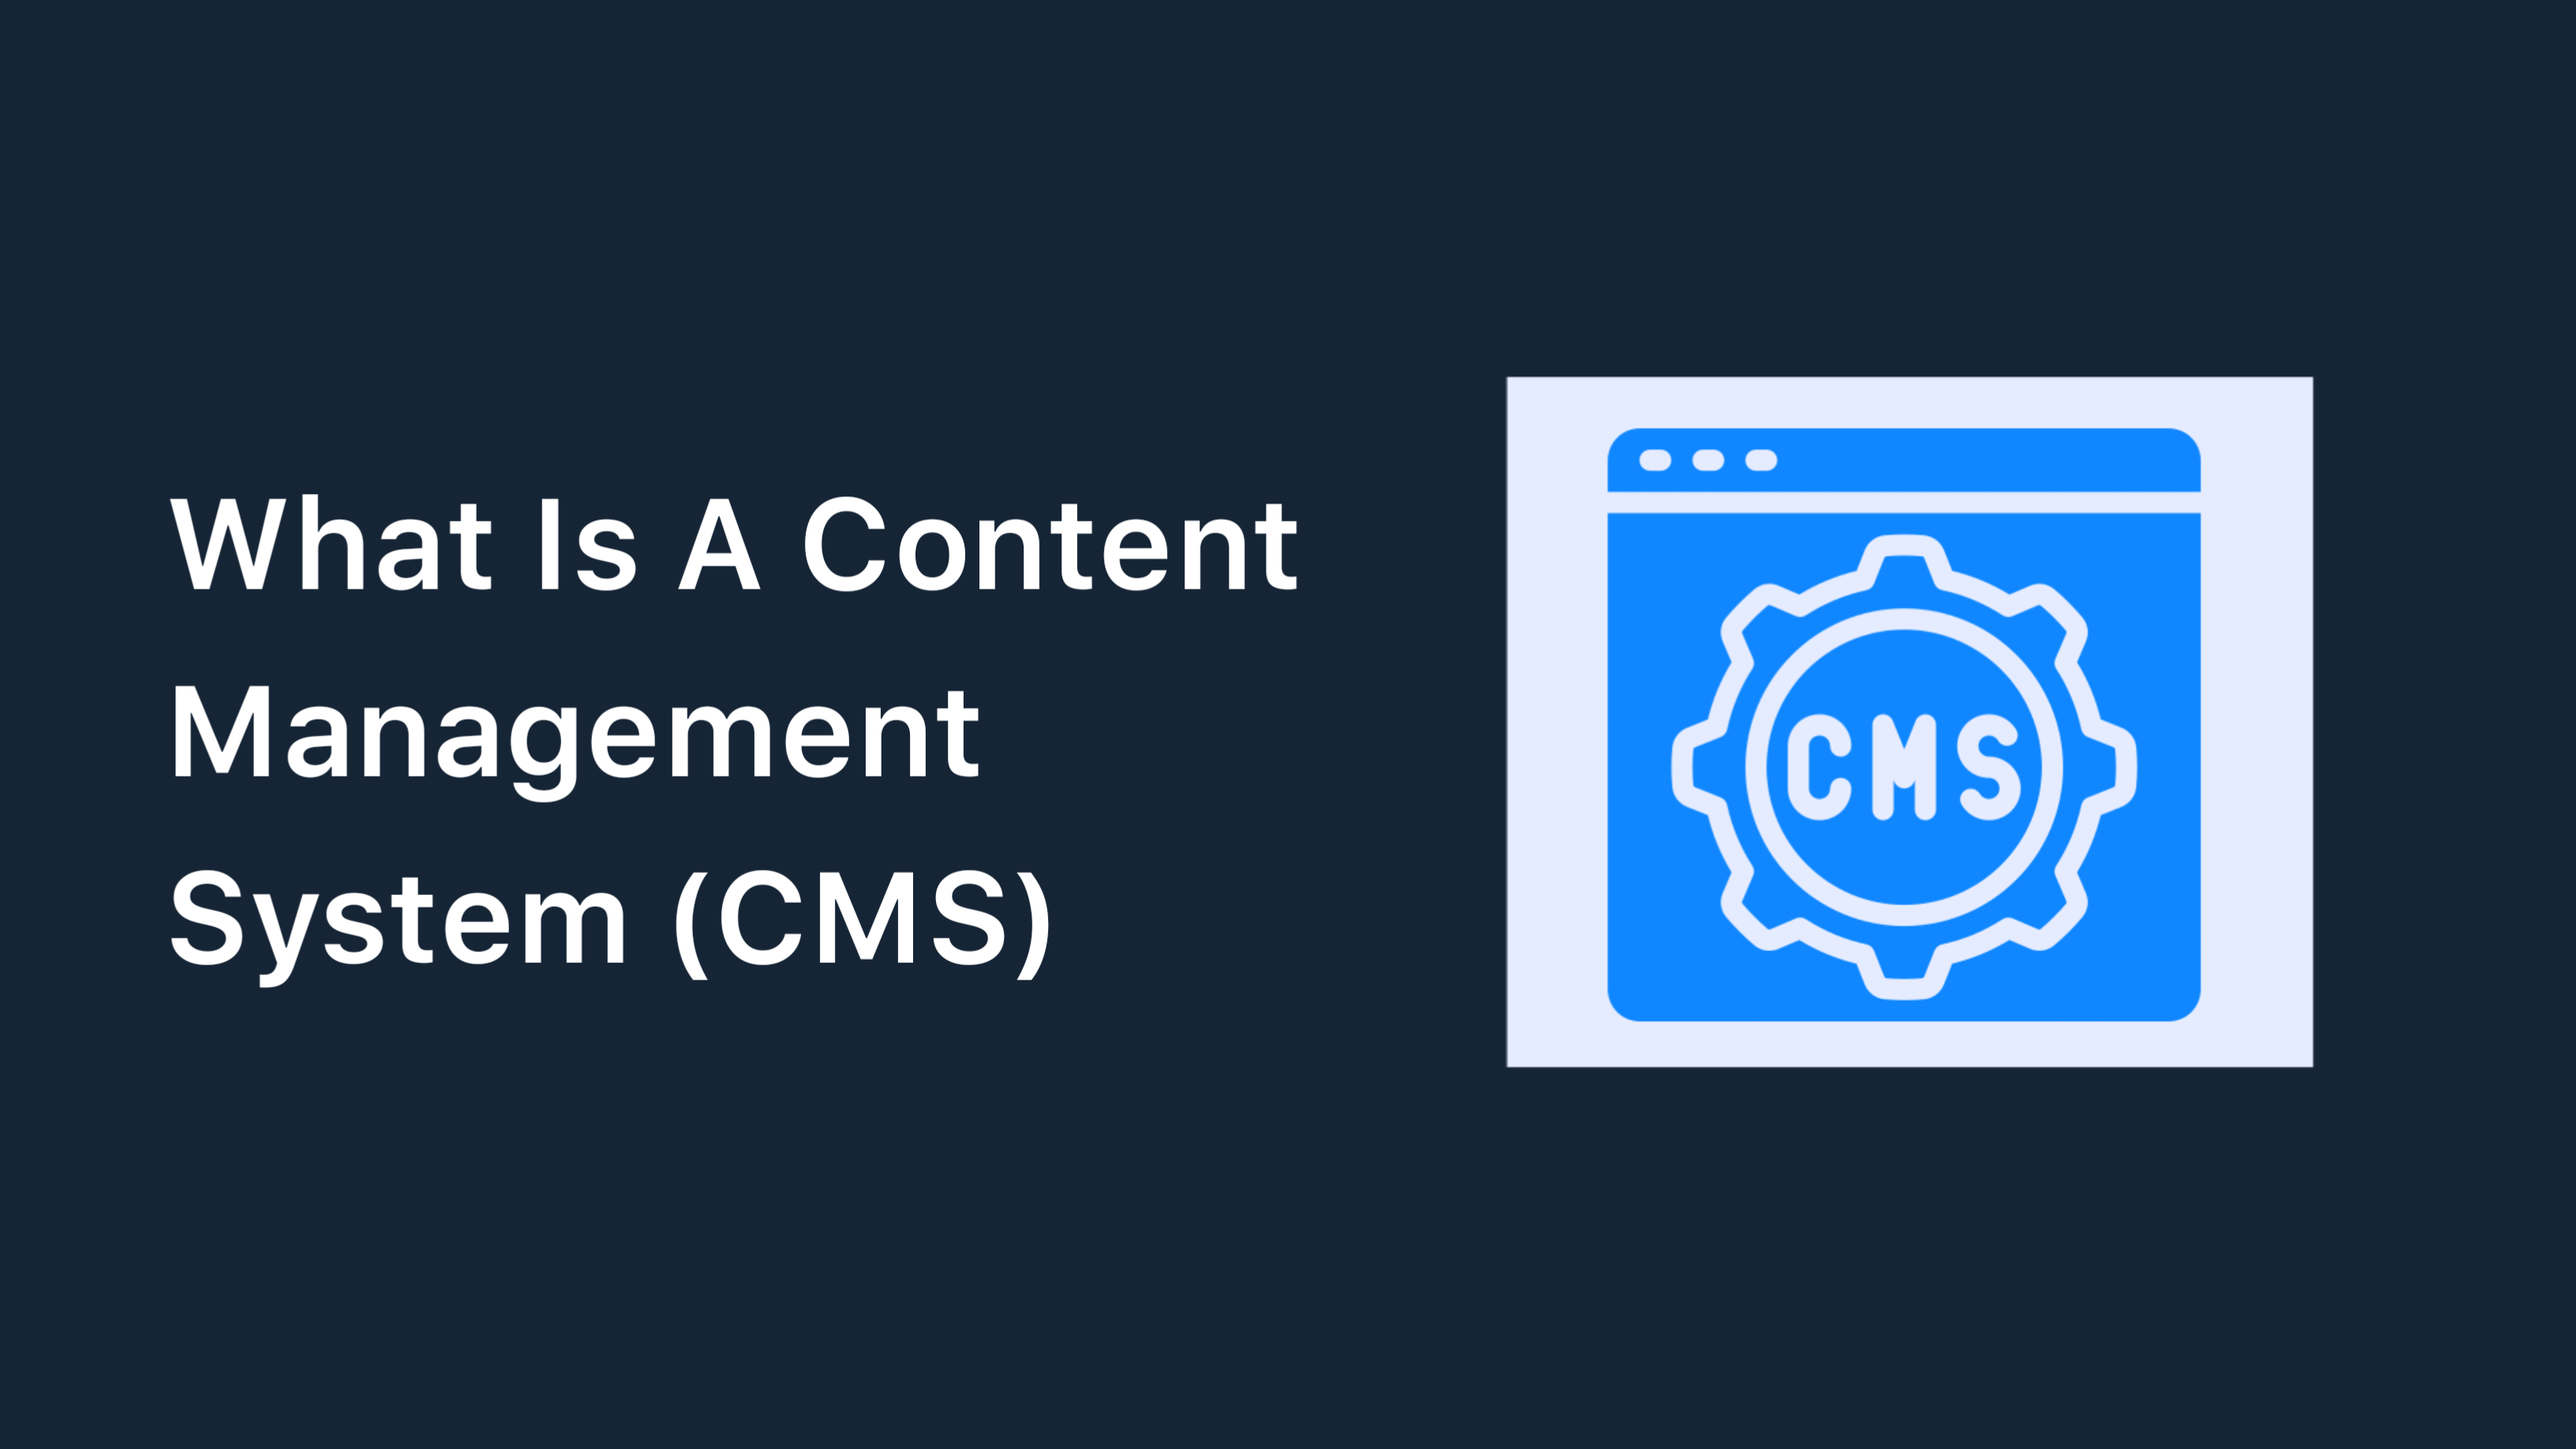 What Is A Content Management System (CMS)